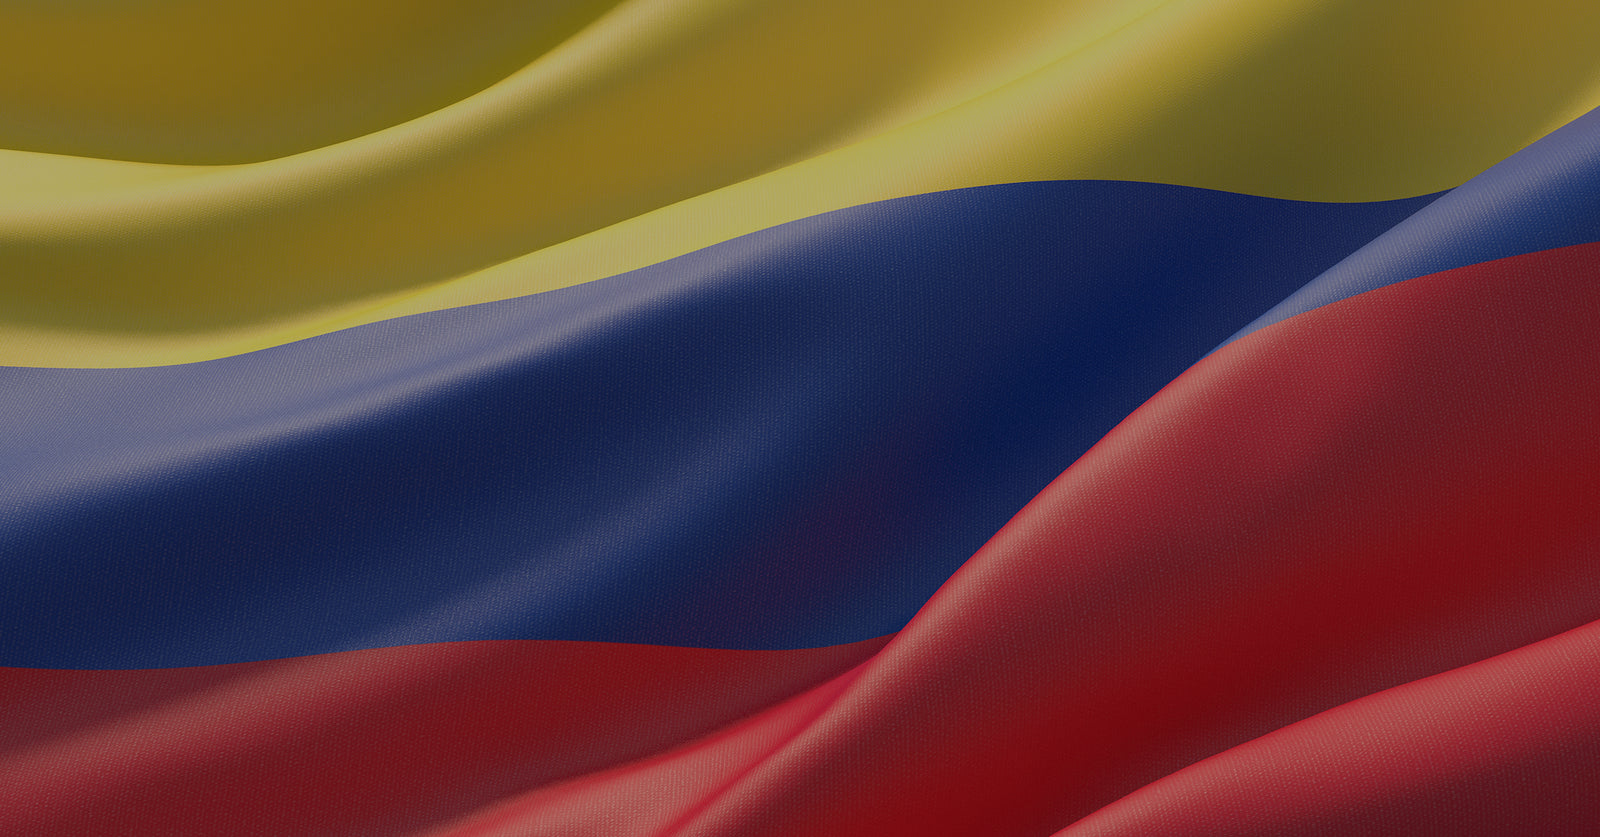 Columbian flag with the colors yellow, blue, and red.